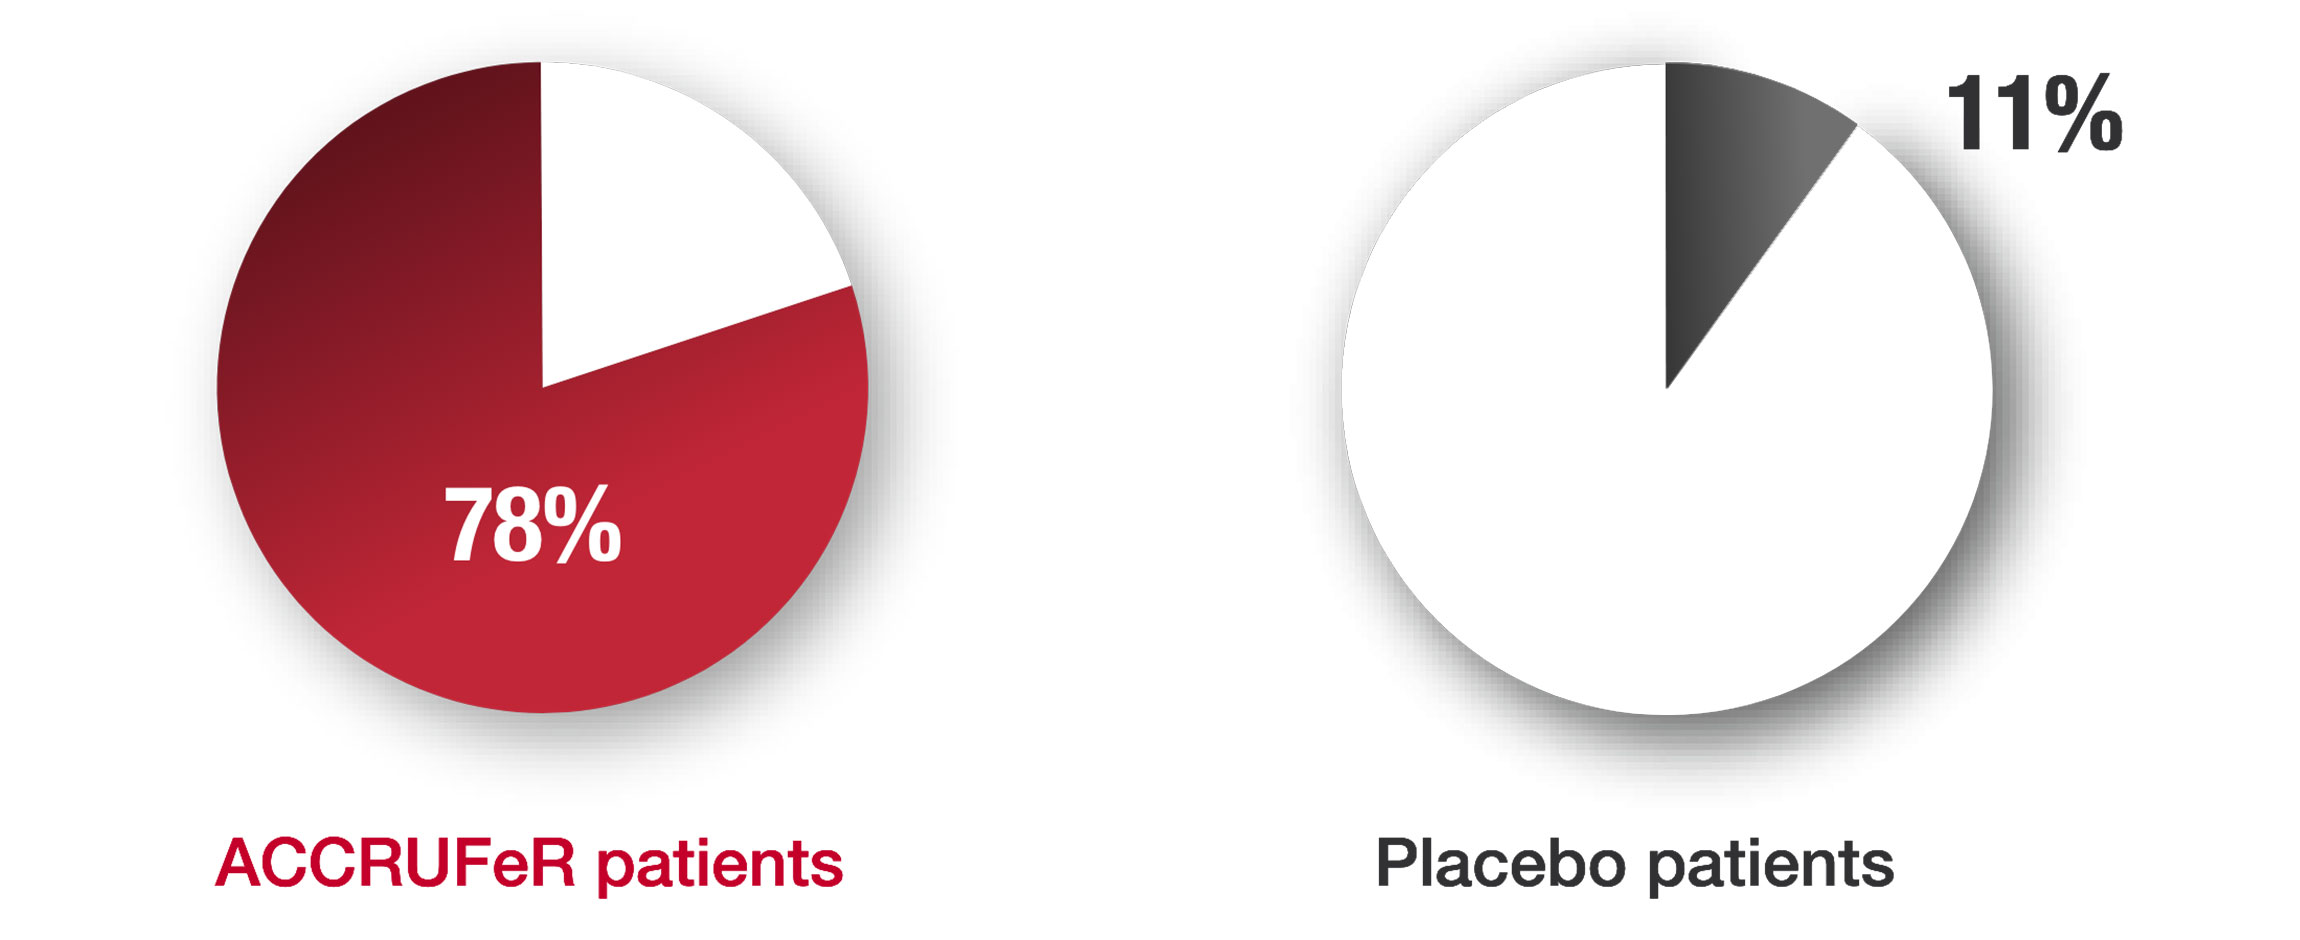 Pie chart image showing responder analysis - 78% of Accrufer patients had a ≥1 g/dL change in hemoglobin at week 12 vs 11% placebo